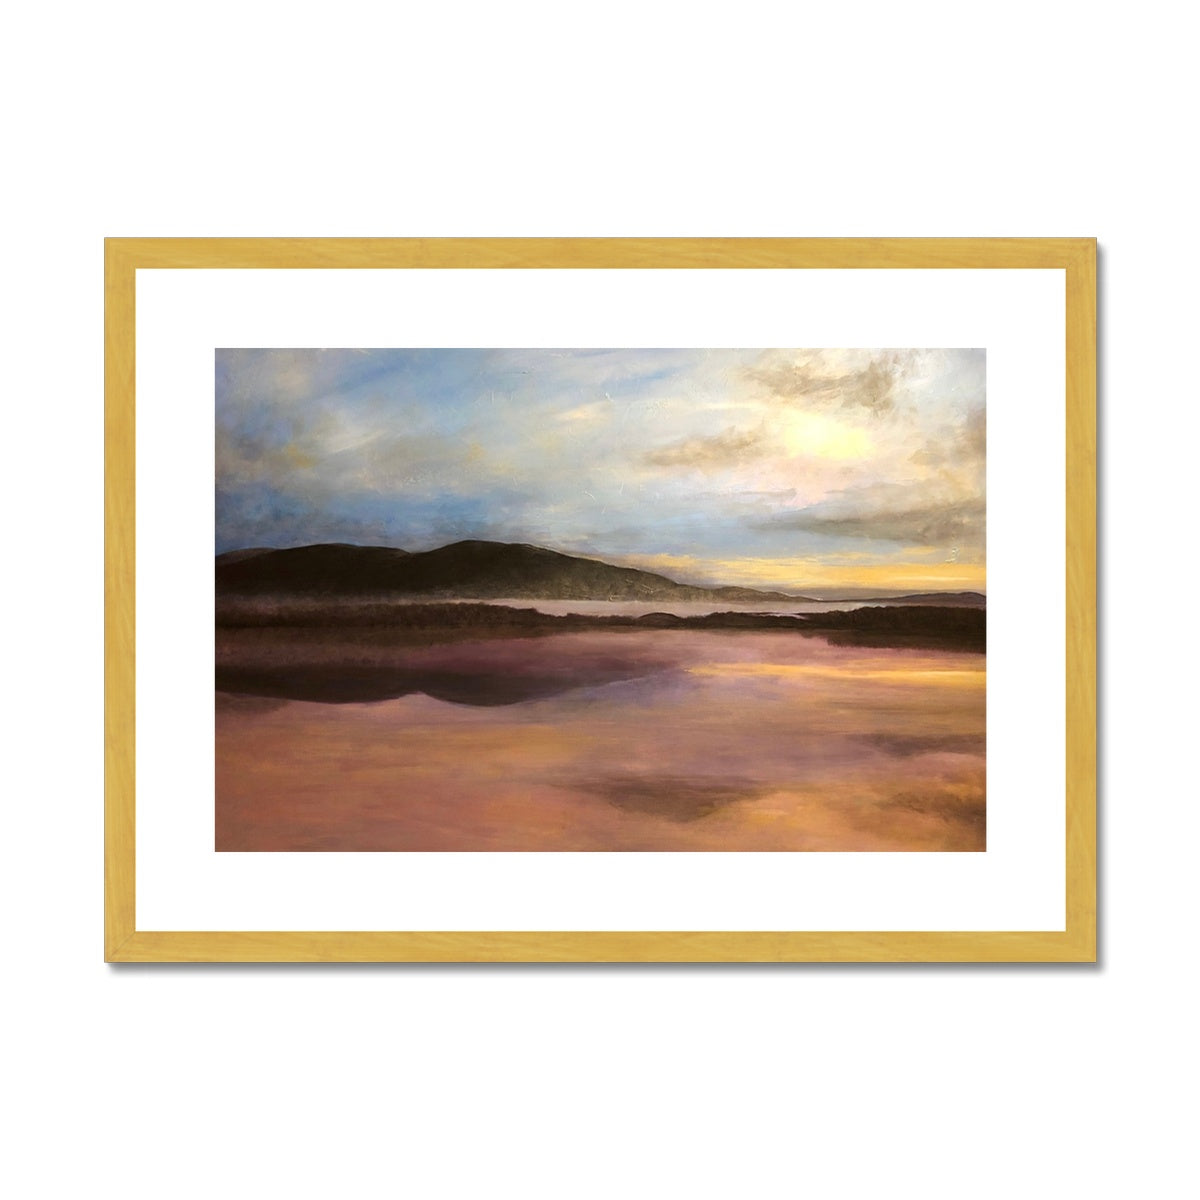 Loch Garten Painting | Antique Framed & Mounted Prints From Scotland-Antique Framed & Mounted Prints-Scottish Lochs & Mountains Art Gallery-A2 Landscape-Gold Frame-Paintings, Prints, Homeware, Art Gifts From Scotland By Scottish Artist Kevin Hunter